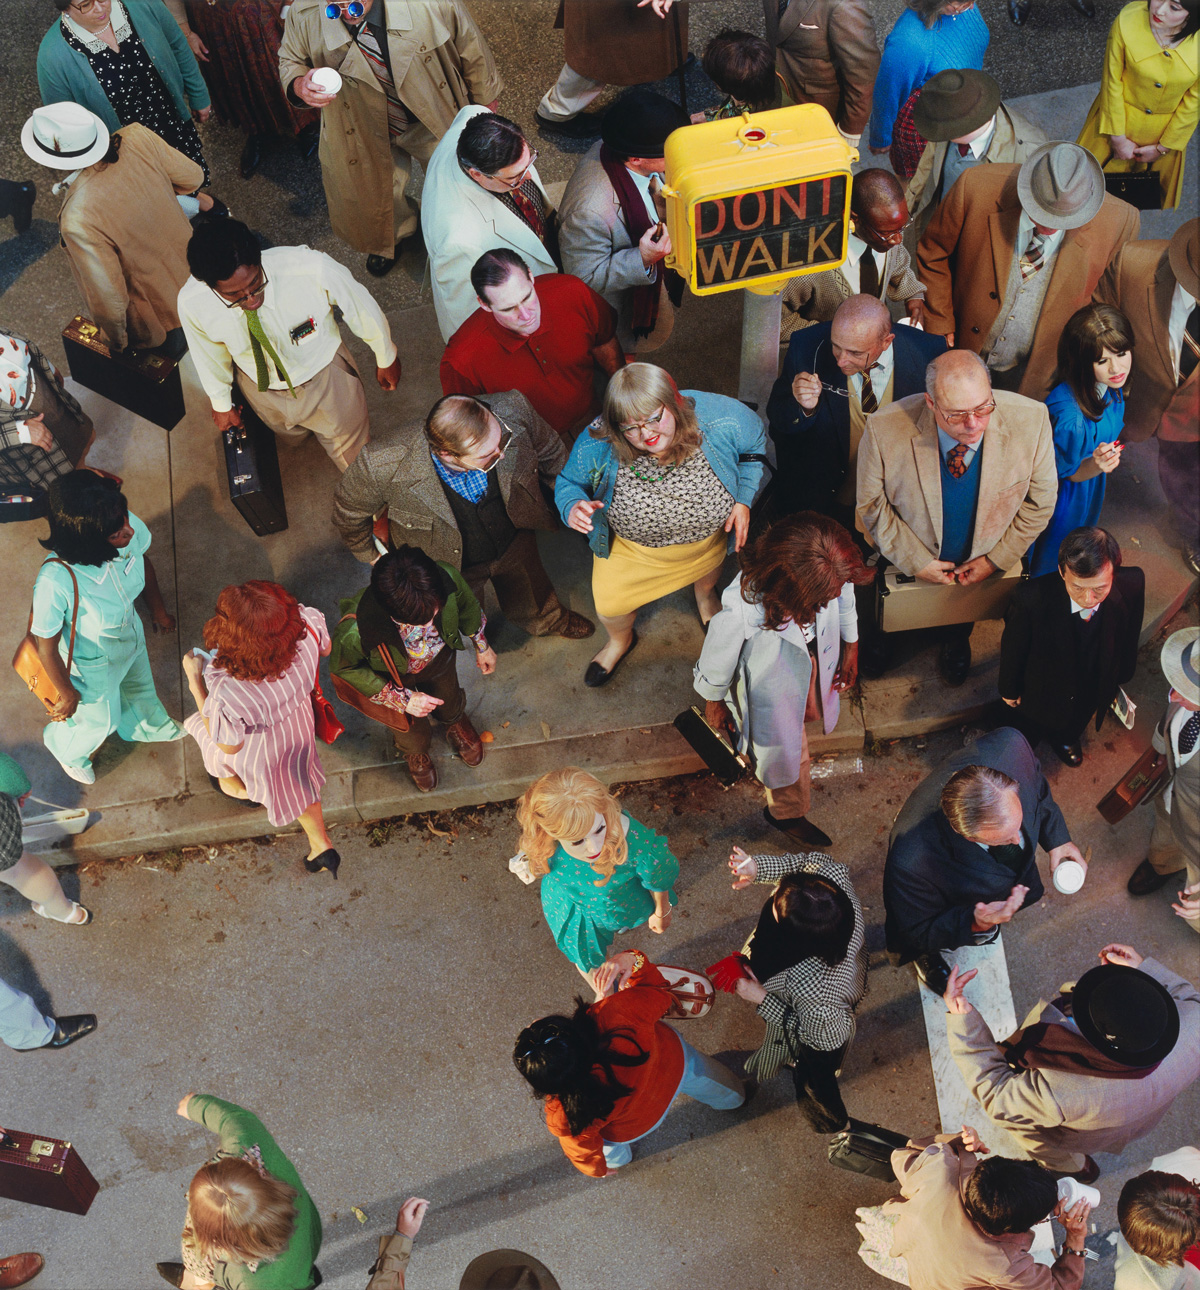 alex prager face in the crowd ジグソーパズル - yanbunh.com